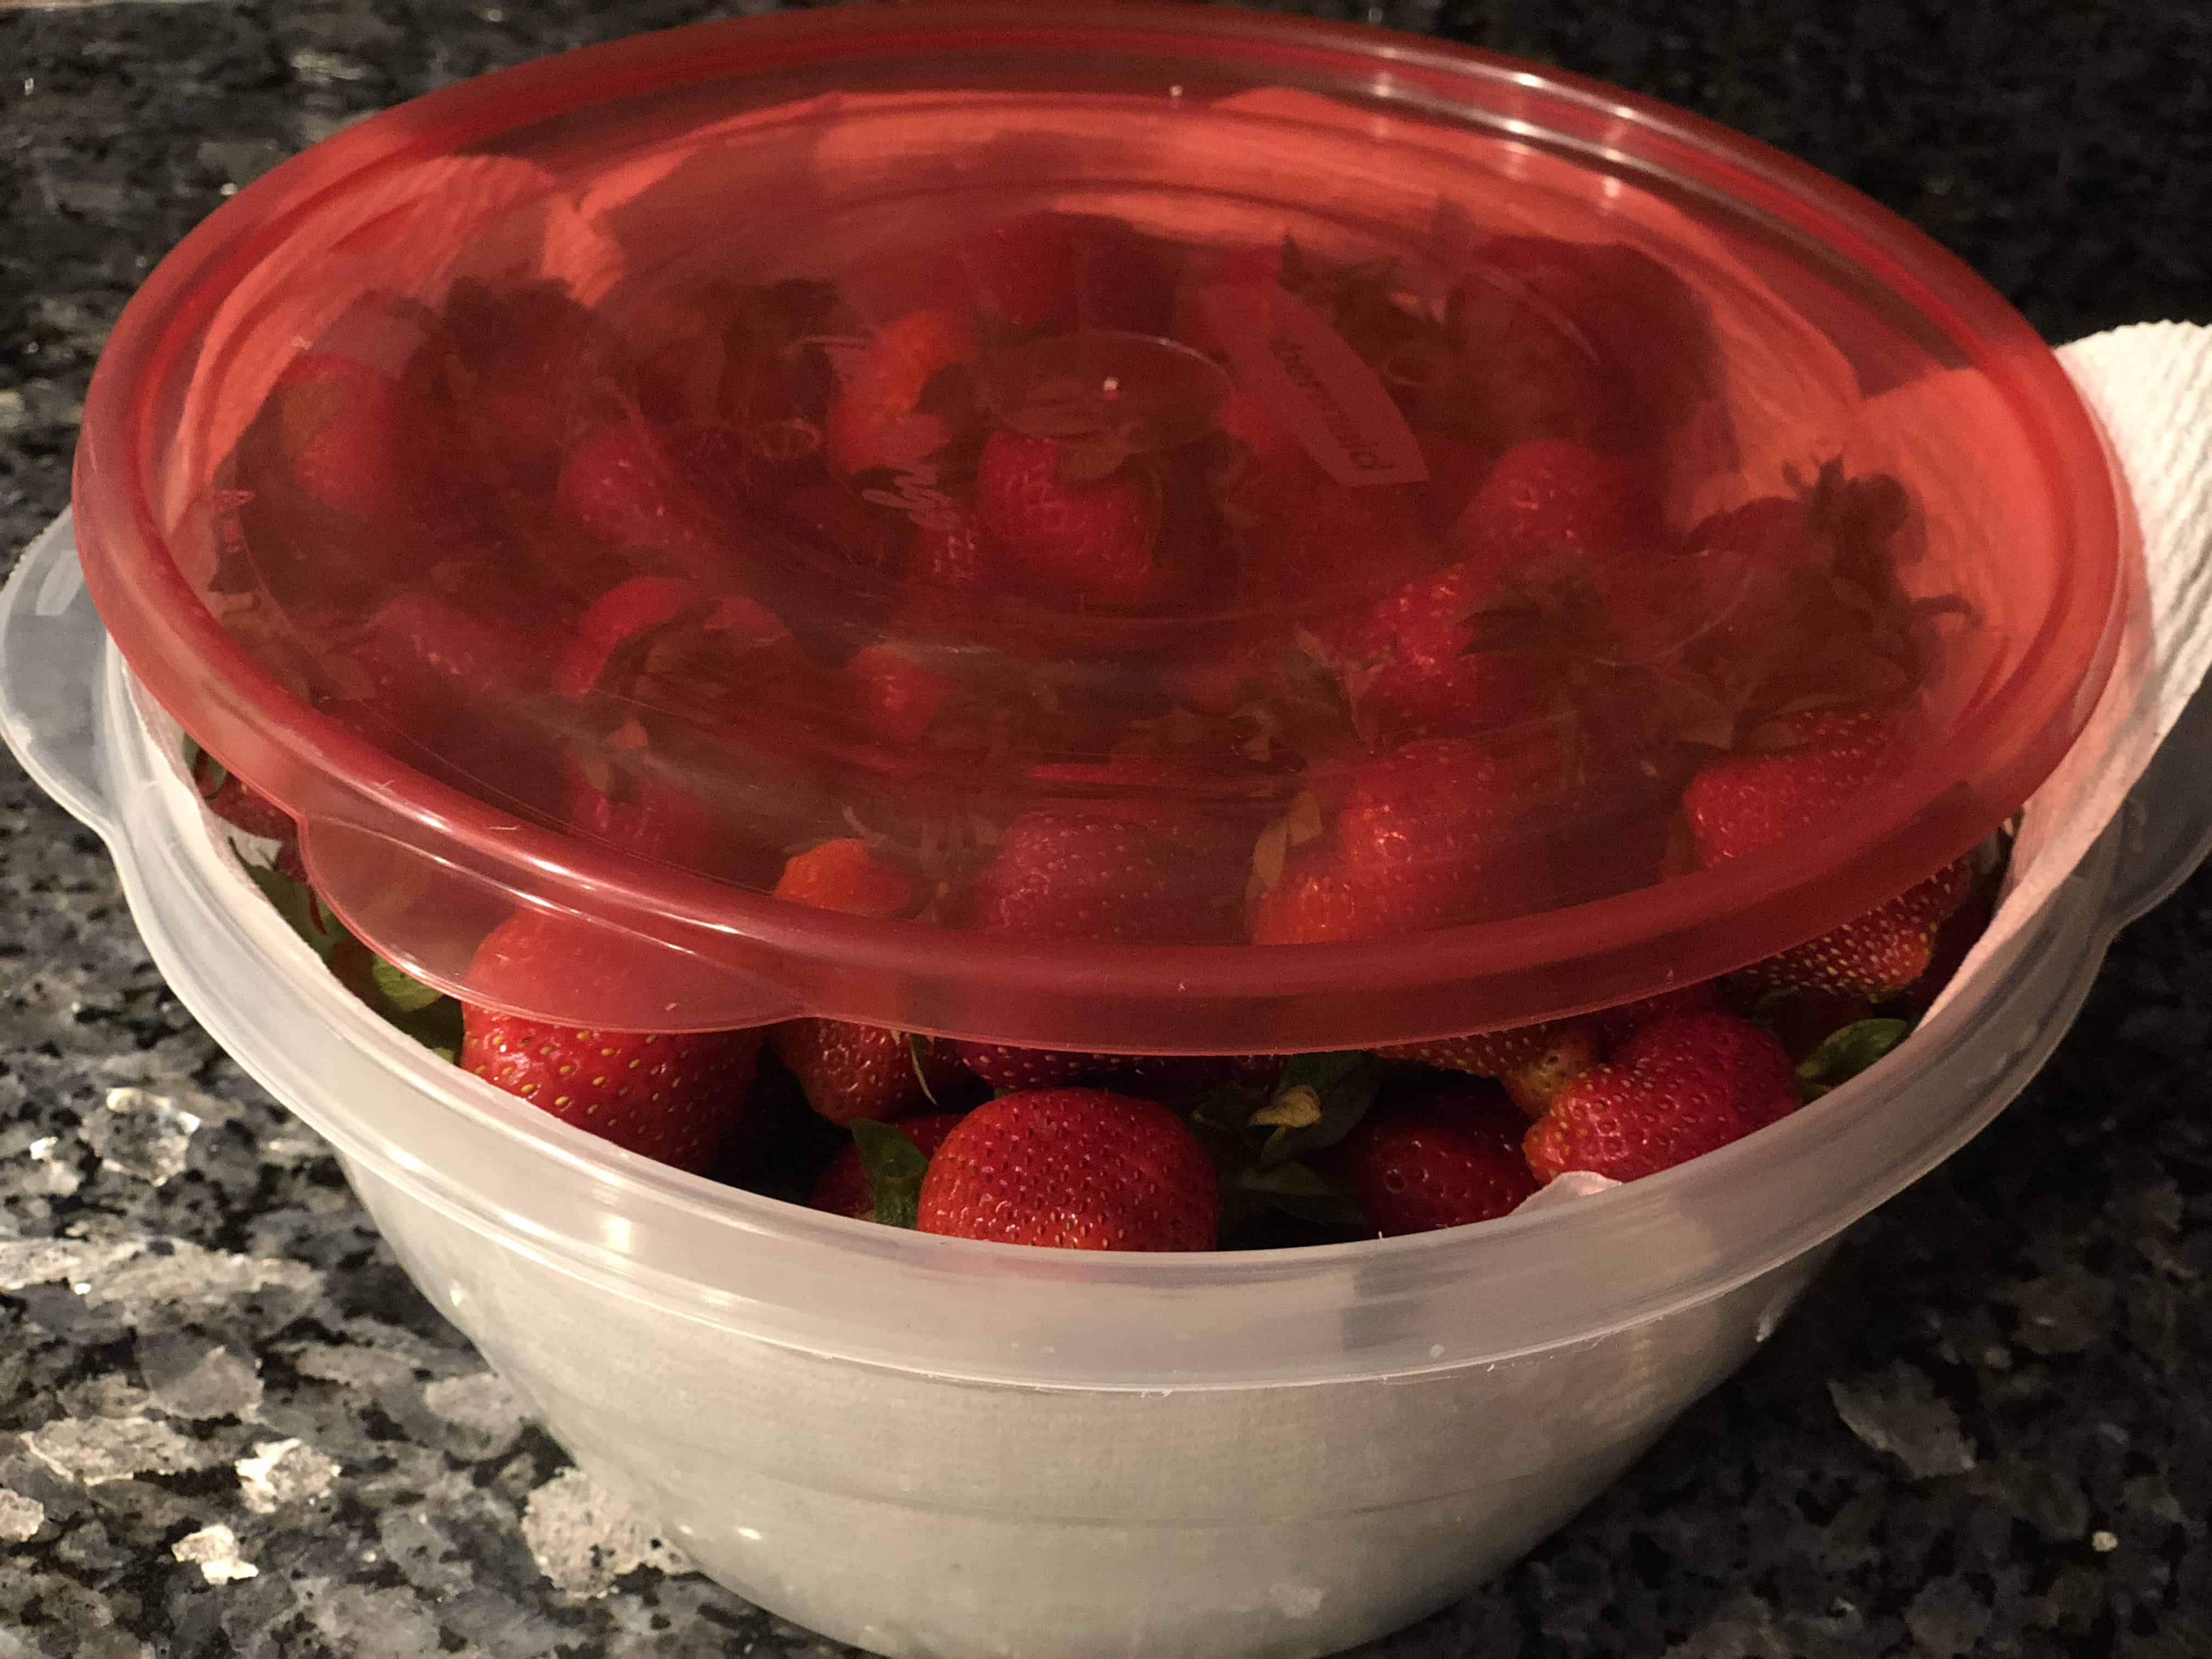 Cover bowl slightly to keep strawberries fresh